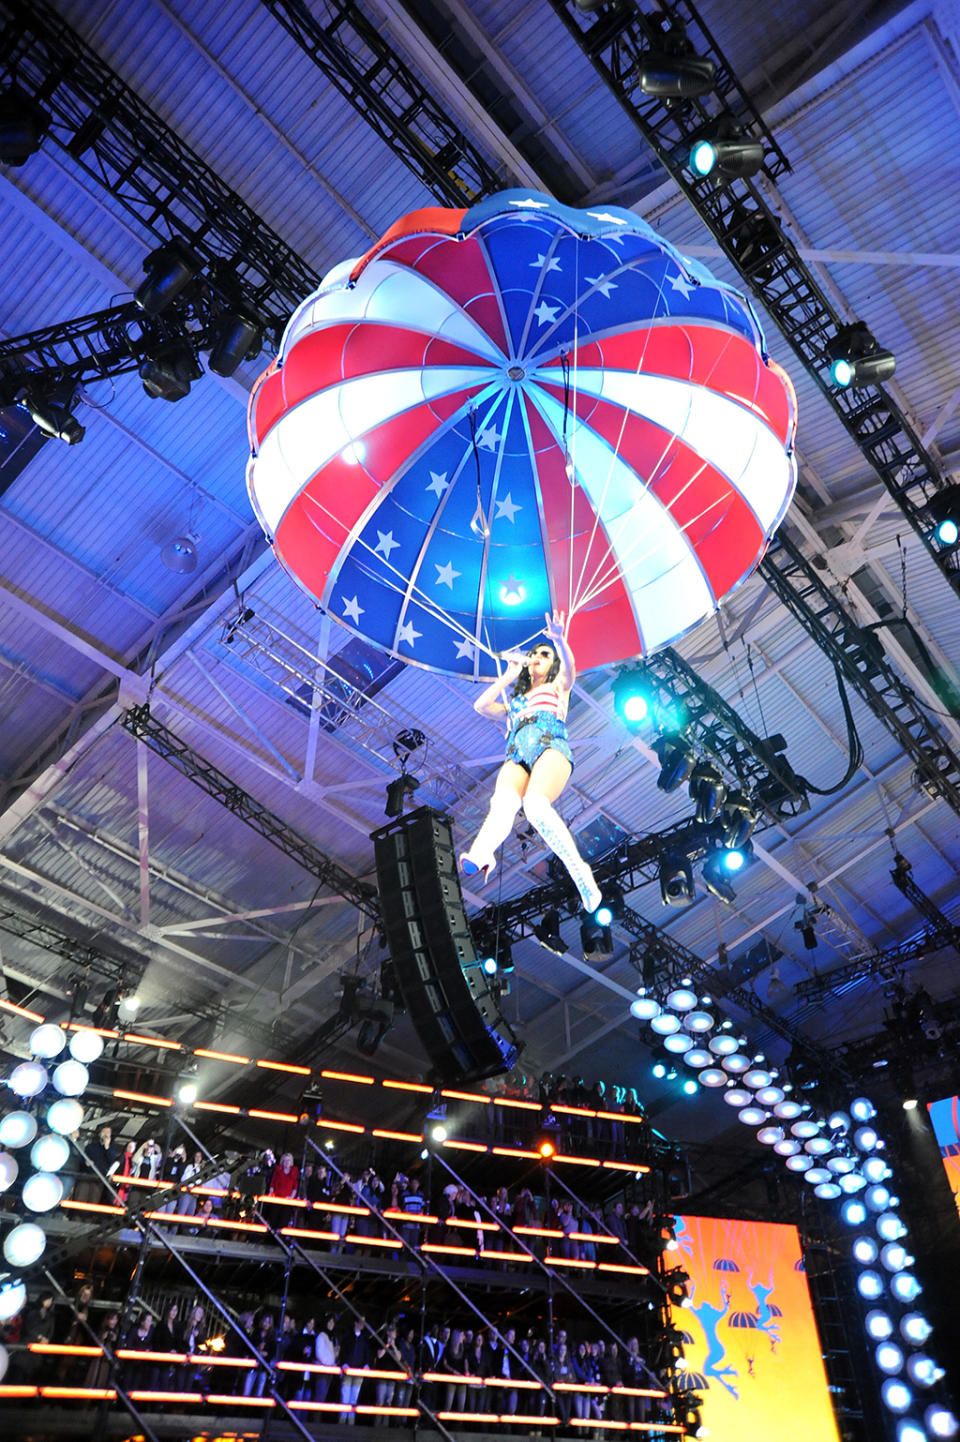 Singer Katy Perry performs onstage during “VH1 Divas Salute the Troops” presented by the USO at the MCAS Miramar on December 3, 2010 in Miramar, California. “VH1 Divas Salute the Troops” concert event will be televised on Sunday, December 5 at 9:00 PM ET/